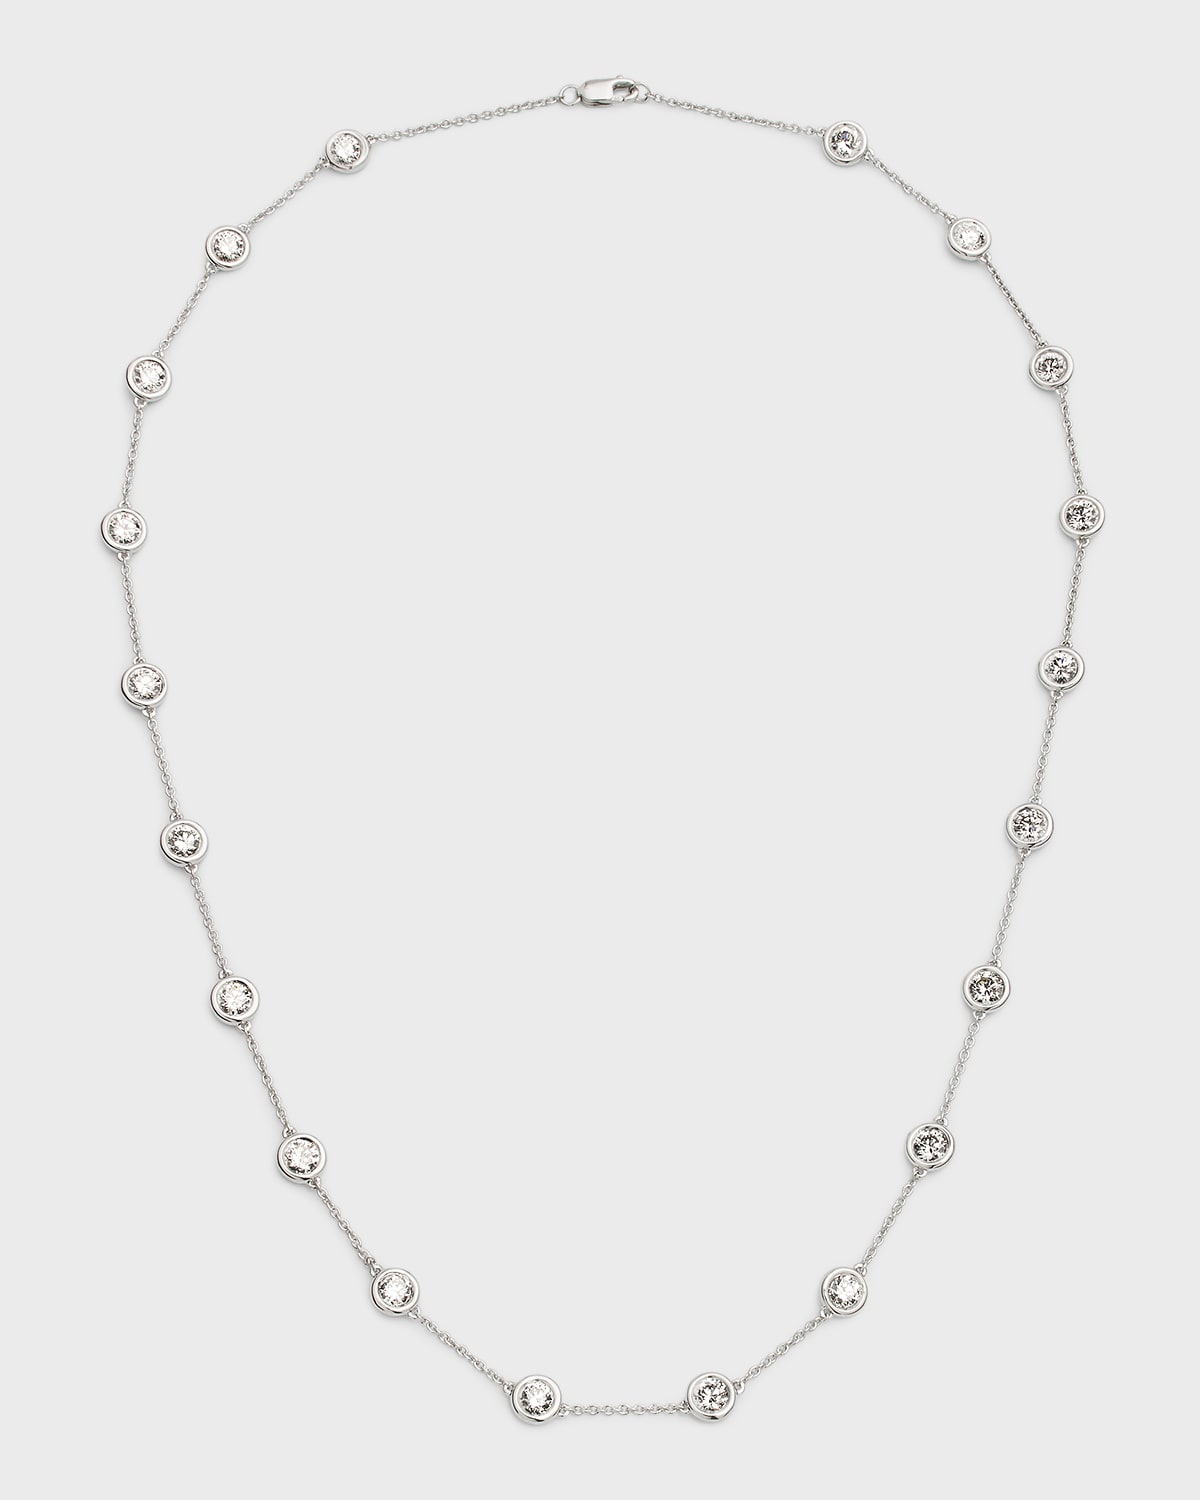 18K White Gold Round Lab Grown Diamond By-the-Yard Necklace, 18"L, 5.0tcw